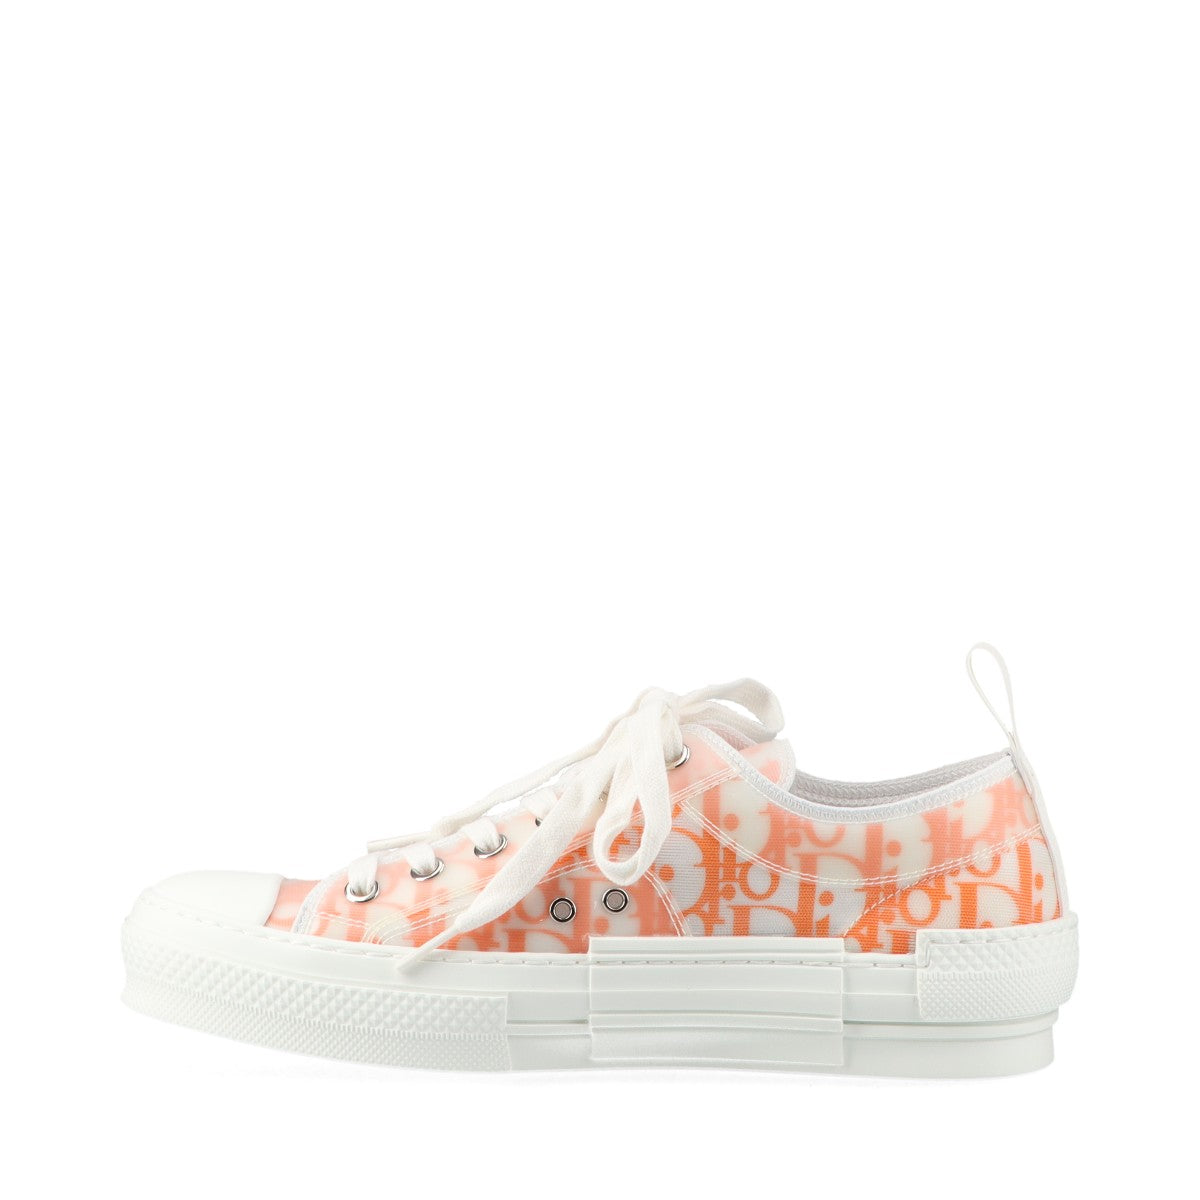 DIOR B23 Rubber x canvas Sneakers 38 Unisex White x orange NV0221 Oblique Replaceable cord box There is a storage bag